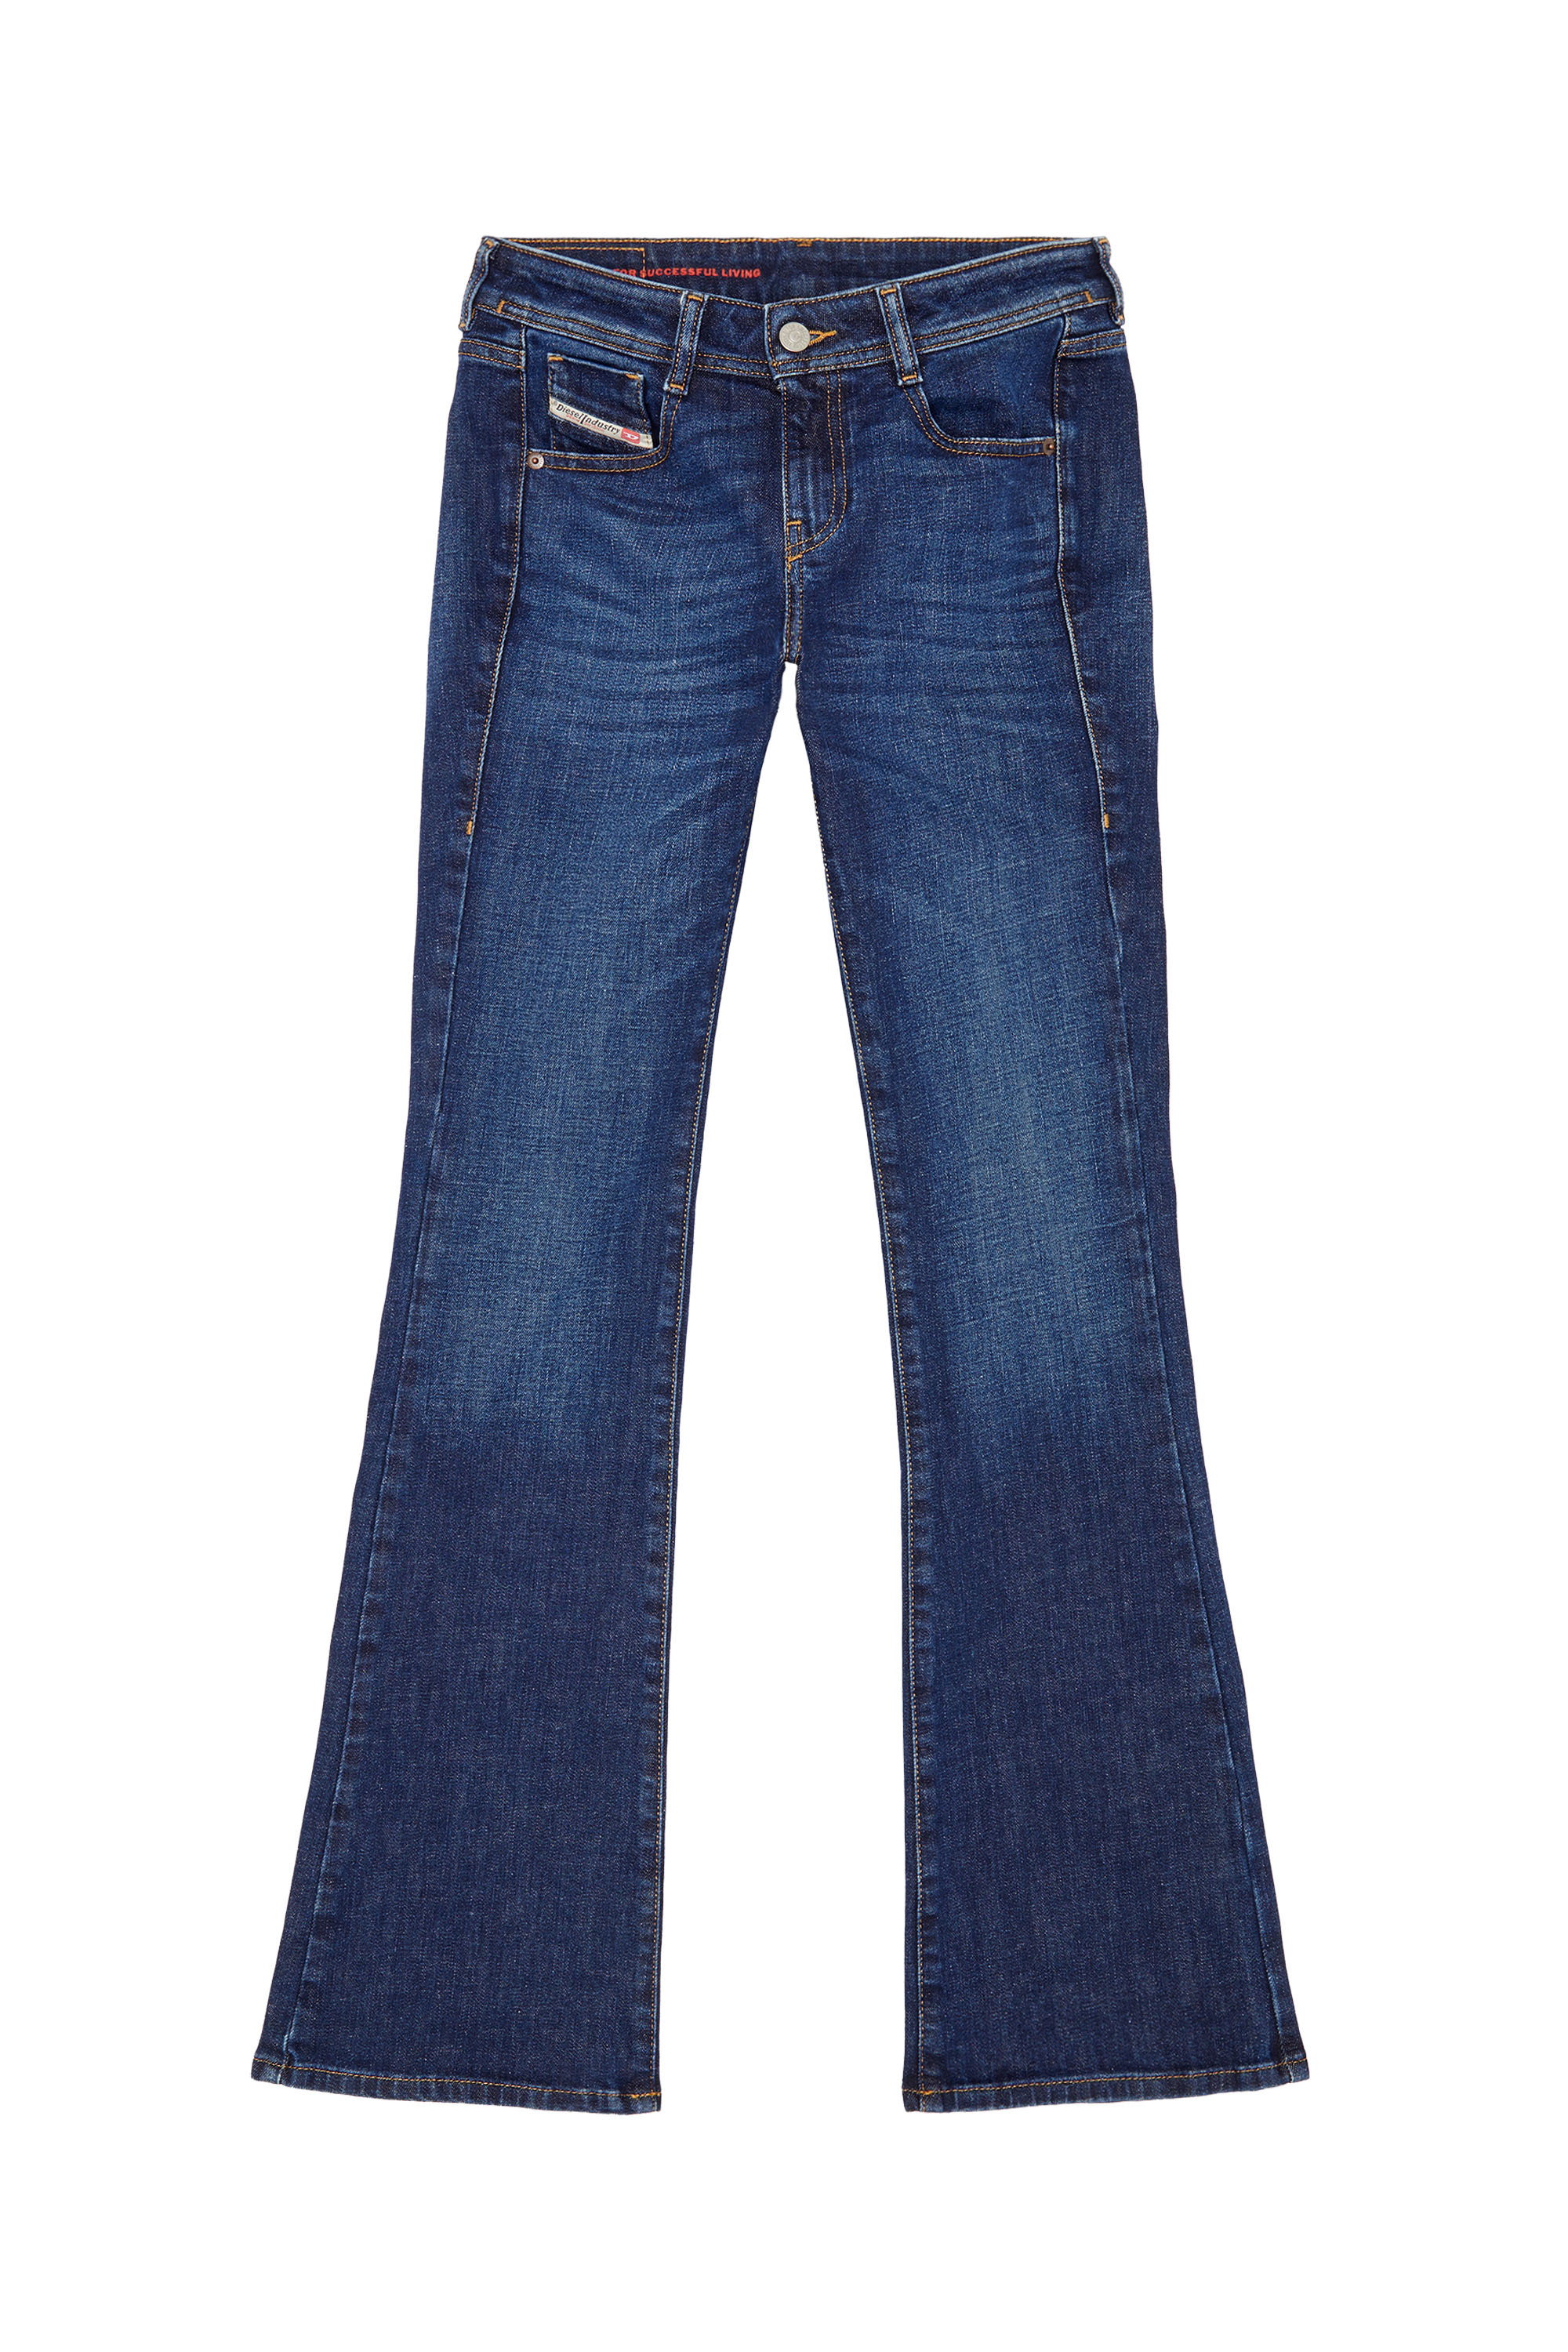 1969 D-EBBEY 09B90 Bootcut and Flare Jeans, Blu Scuro - Jeans